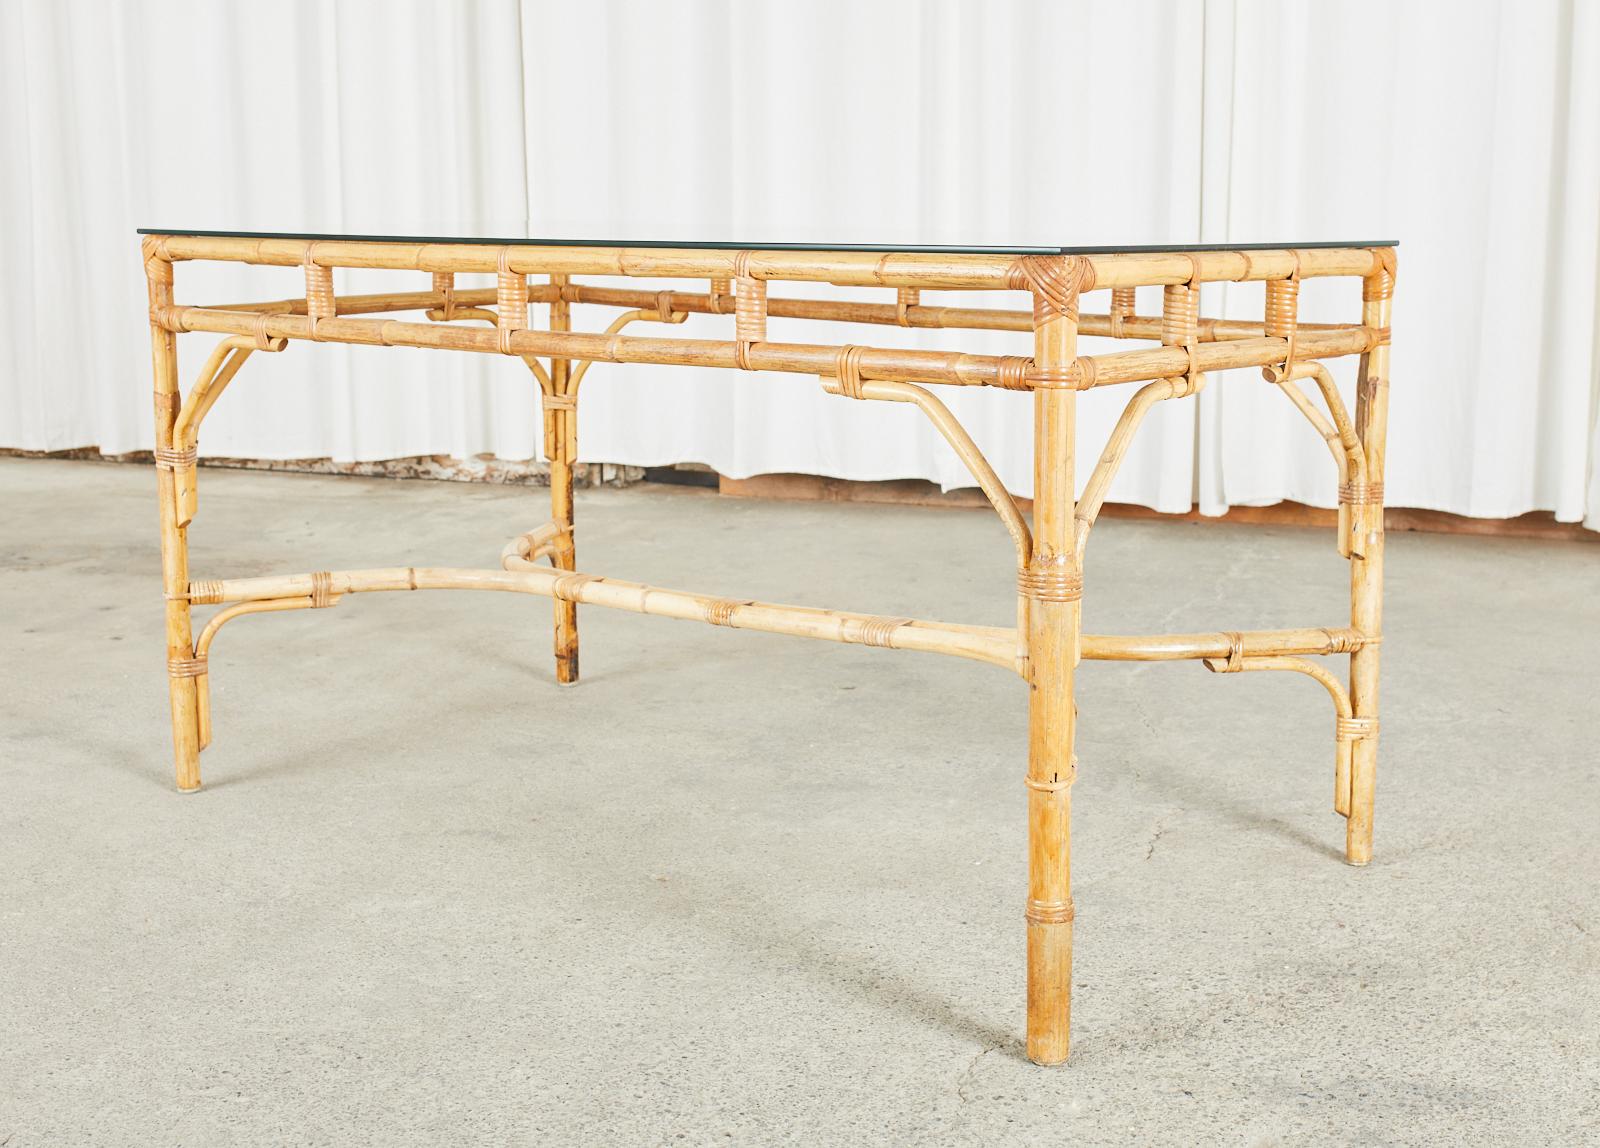 Stylish French Mid-Century Modern dining table crafted from bamboo in the organic modern style. The table features a rectangular bamboo pole frame lashed together with rattan wicker laces. The sides of the table have a decorative open fretwork apron